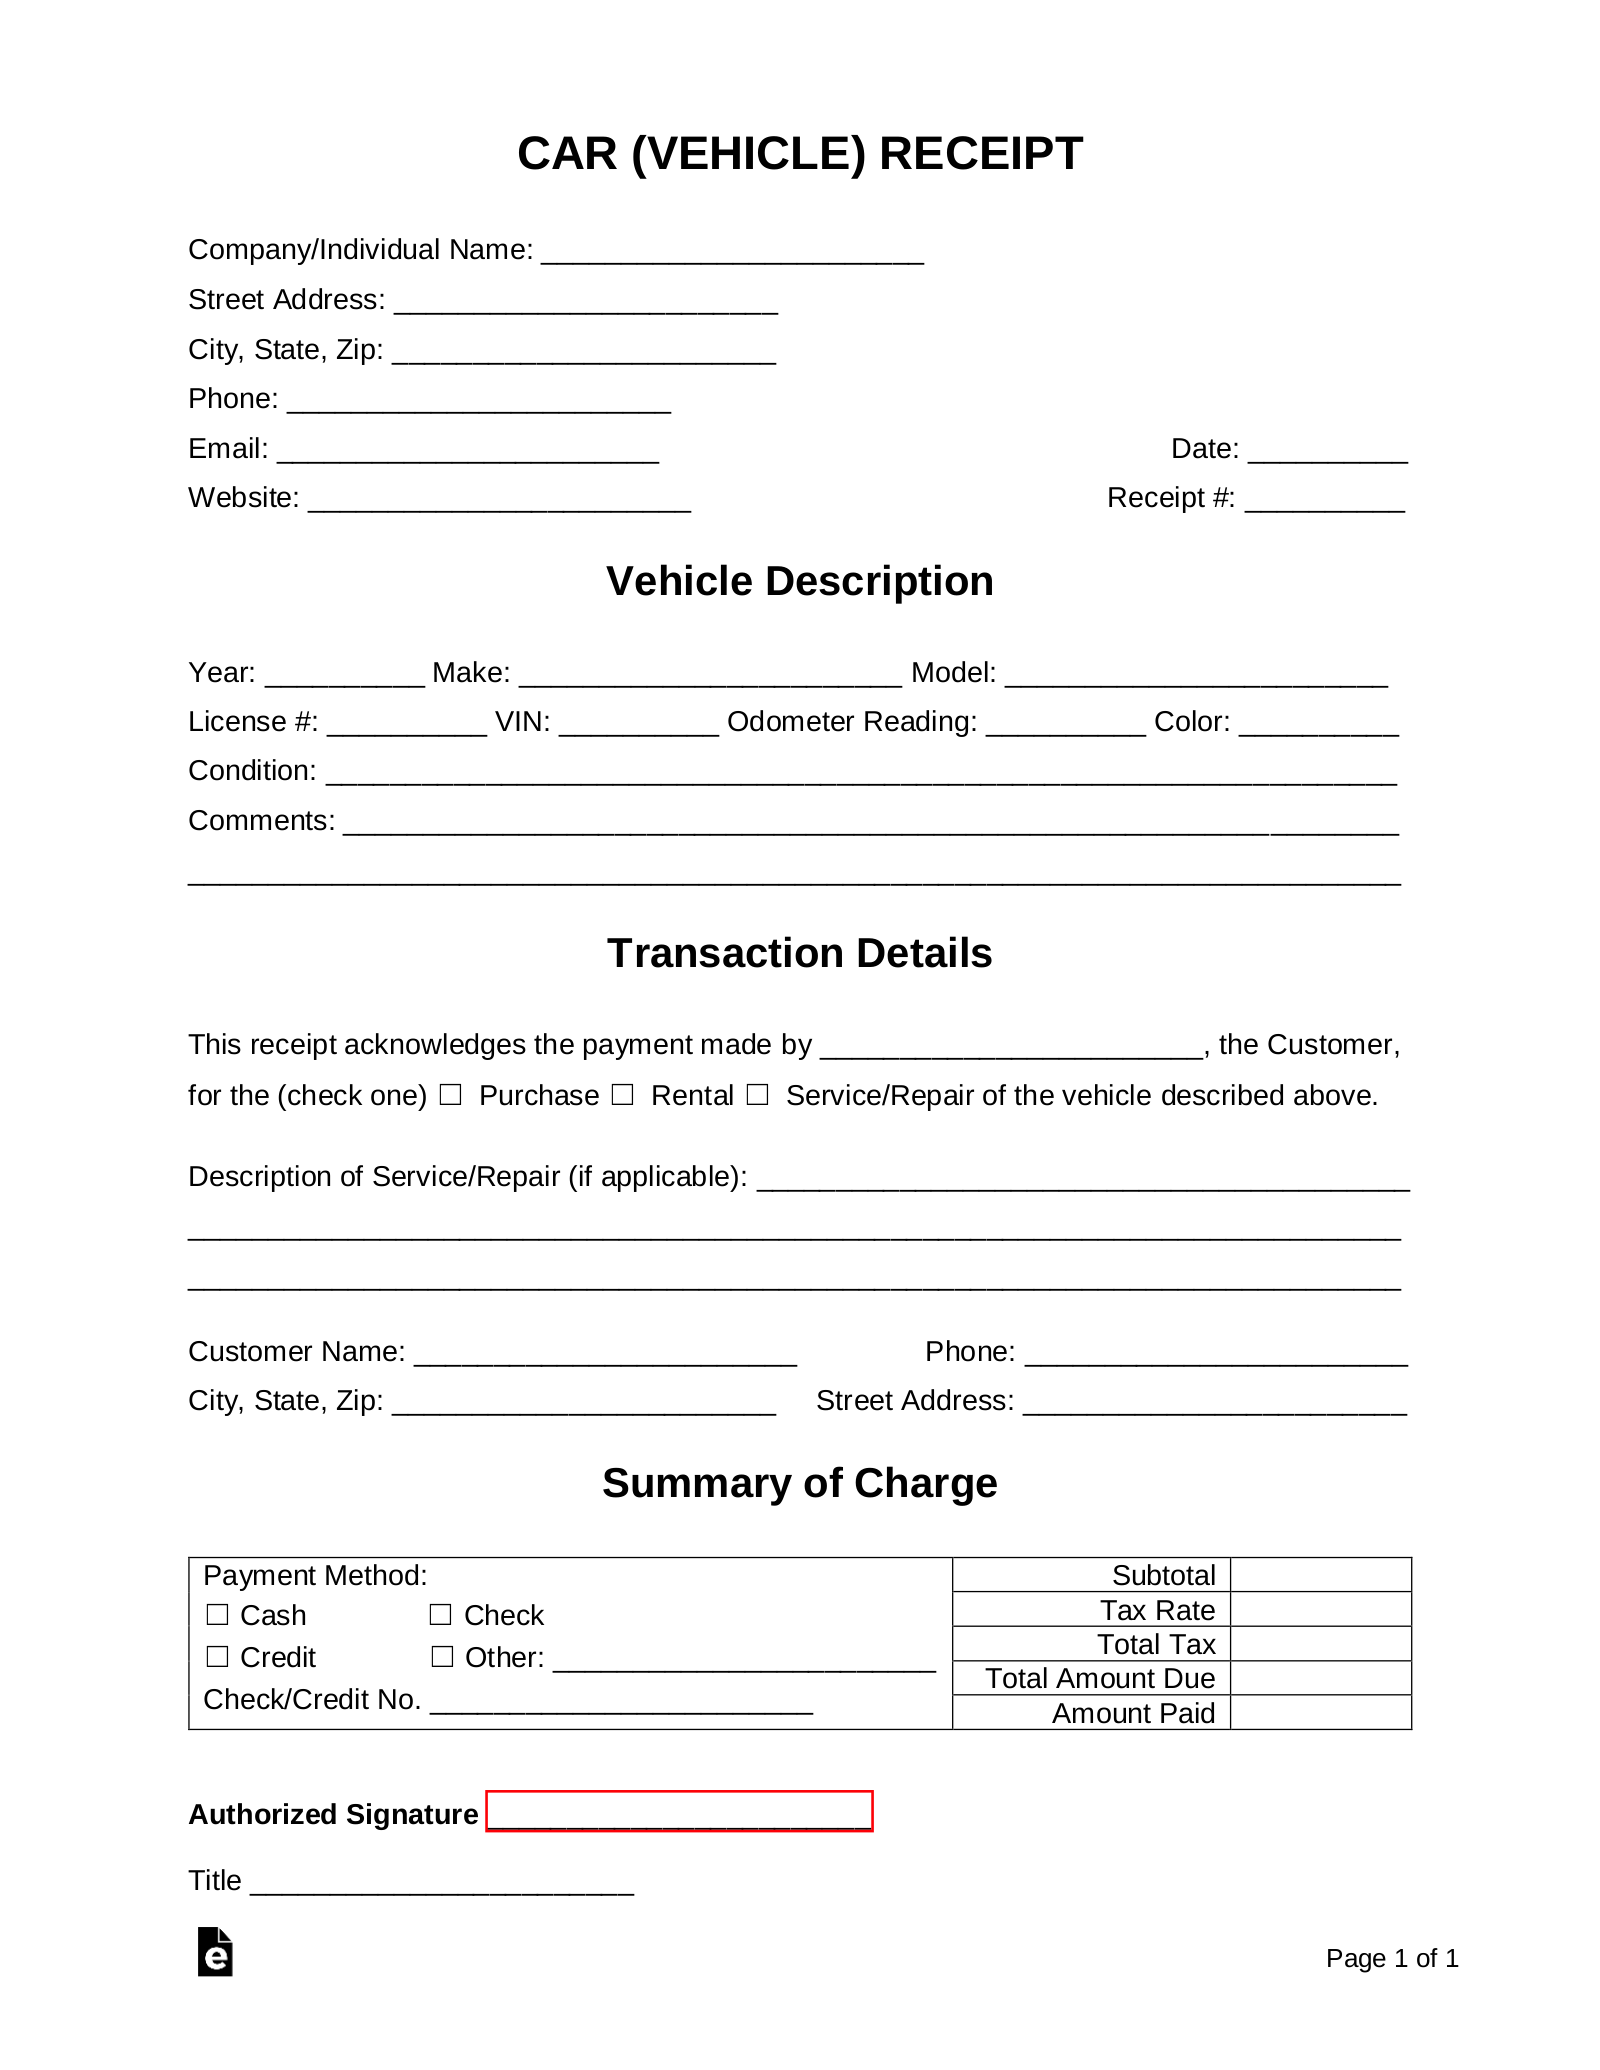 View Car Invoice Template Pdf Pictures Invoice Template Ideas